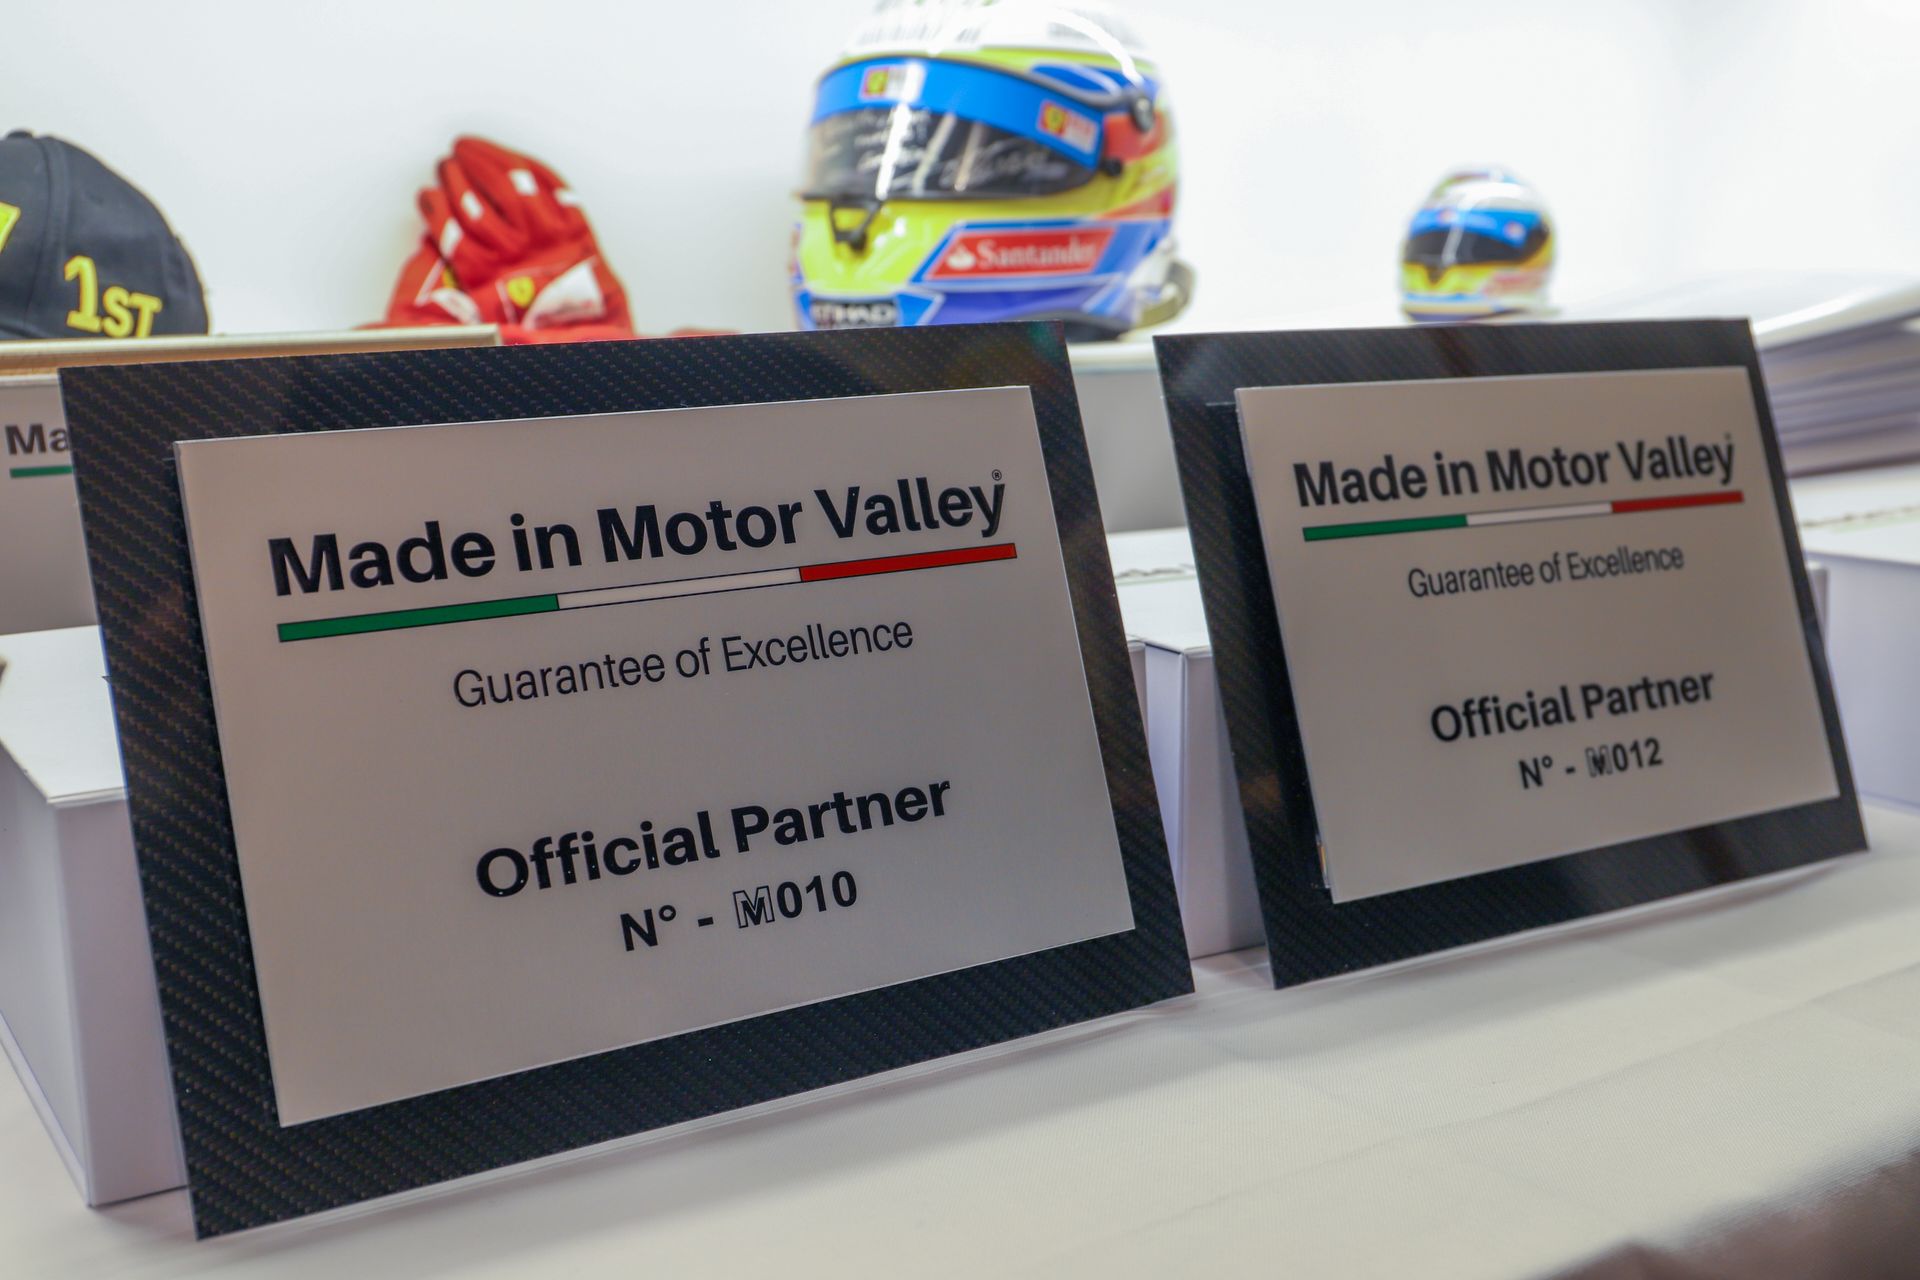 Some of the first plates of companies joining the "Made in Motor Valley" project